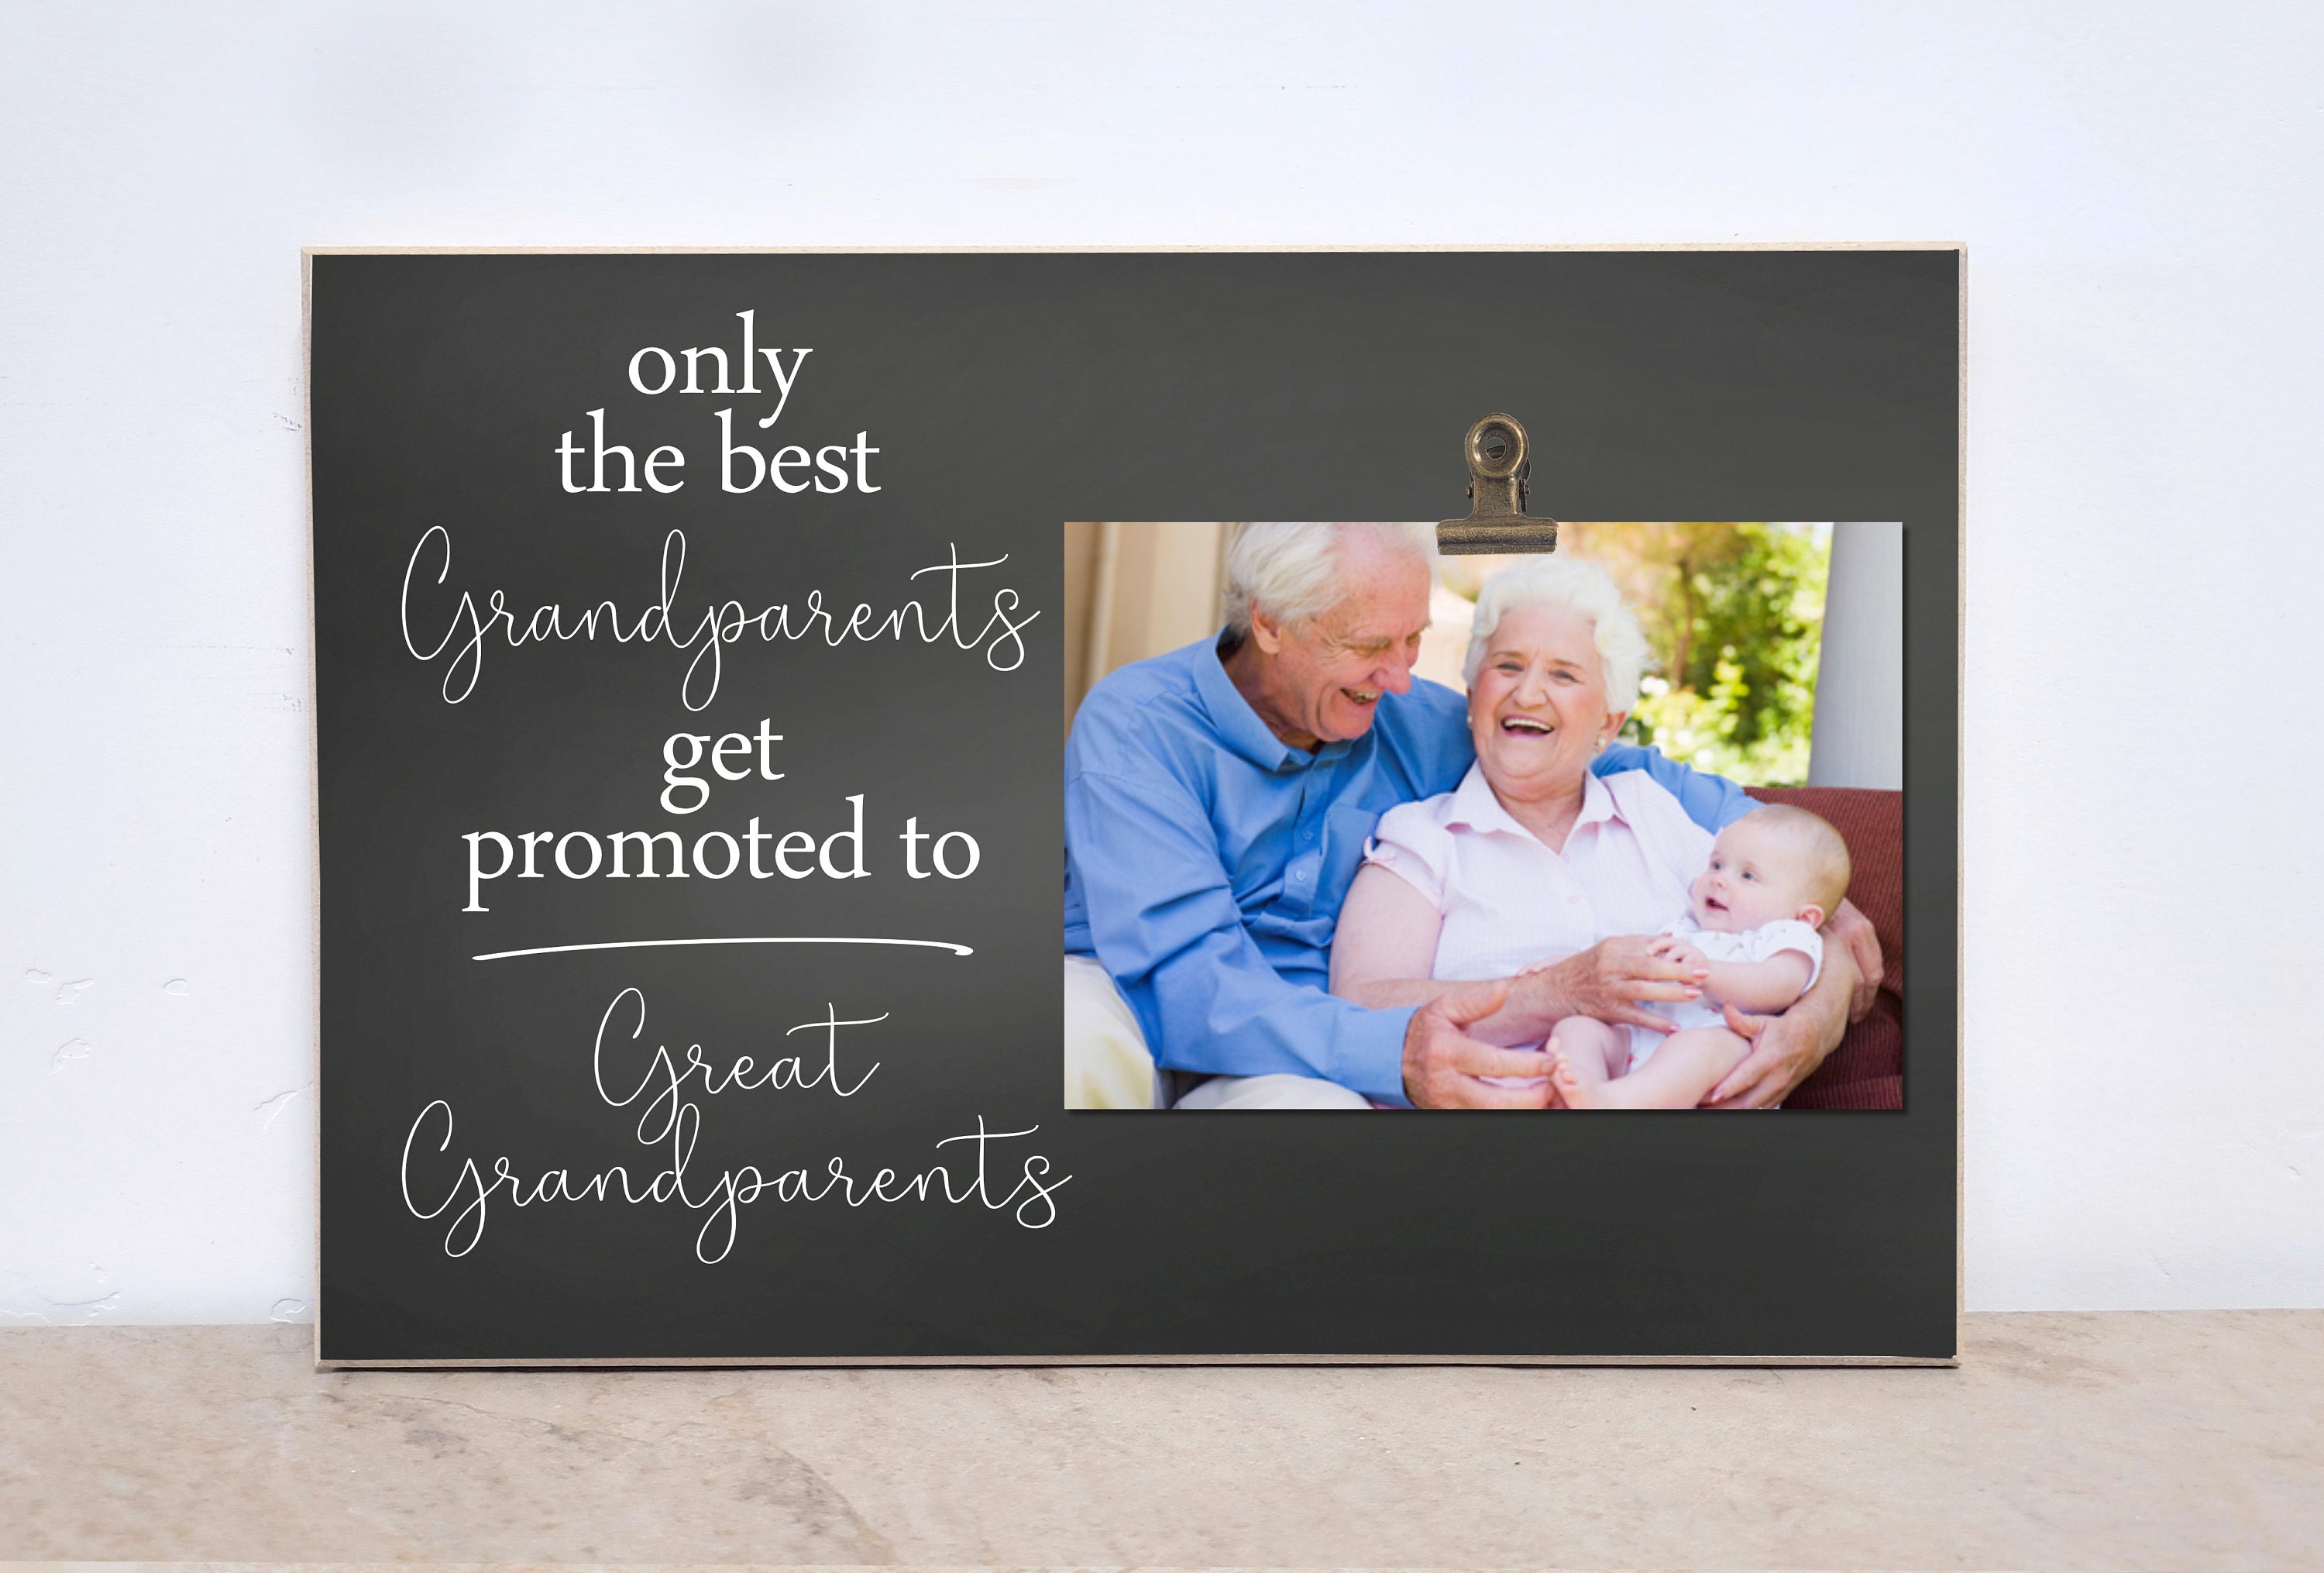 Only the Best Grandparents Promoted to Great Grandparents image